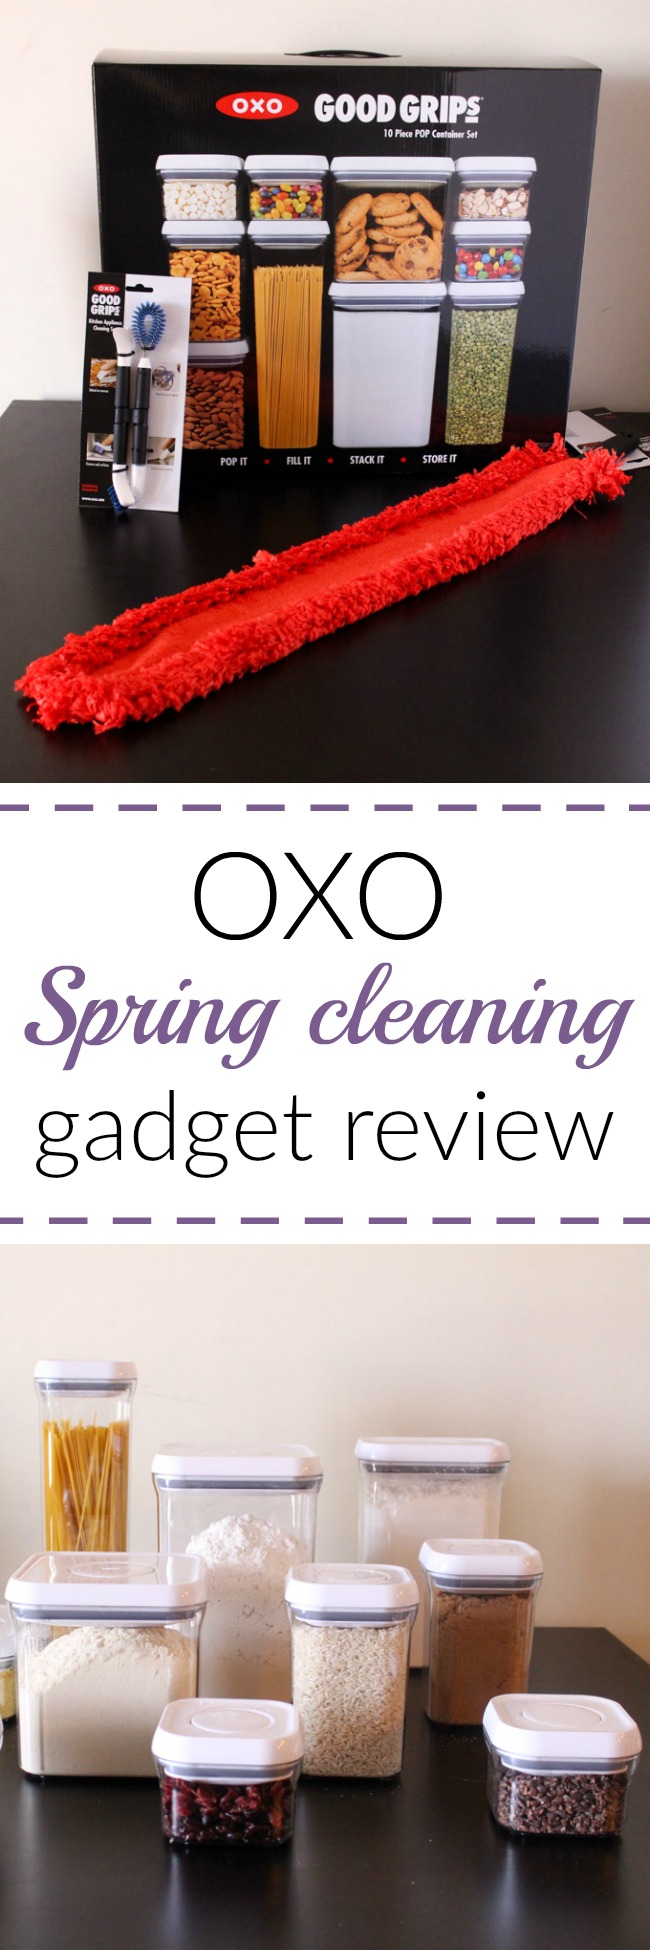 A review of OXO spring cleaning products - there are food storage containers to help organize your pantry and lots of brushes and scrapes to clean every nook and cranny of your kitchen! www.cookingismessy.com